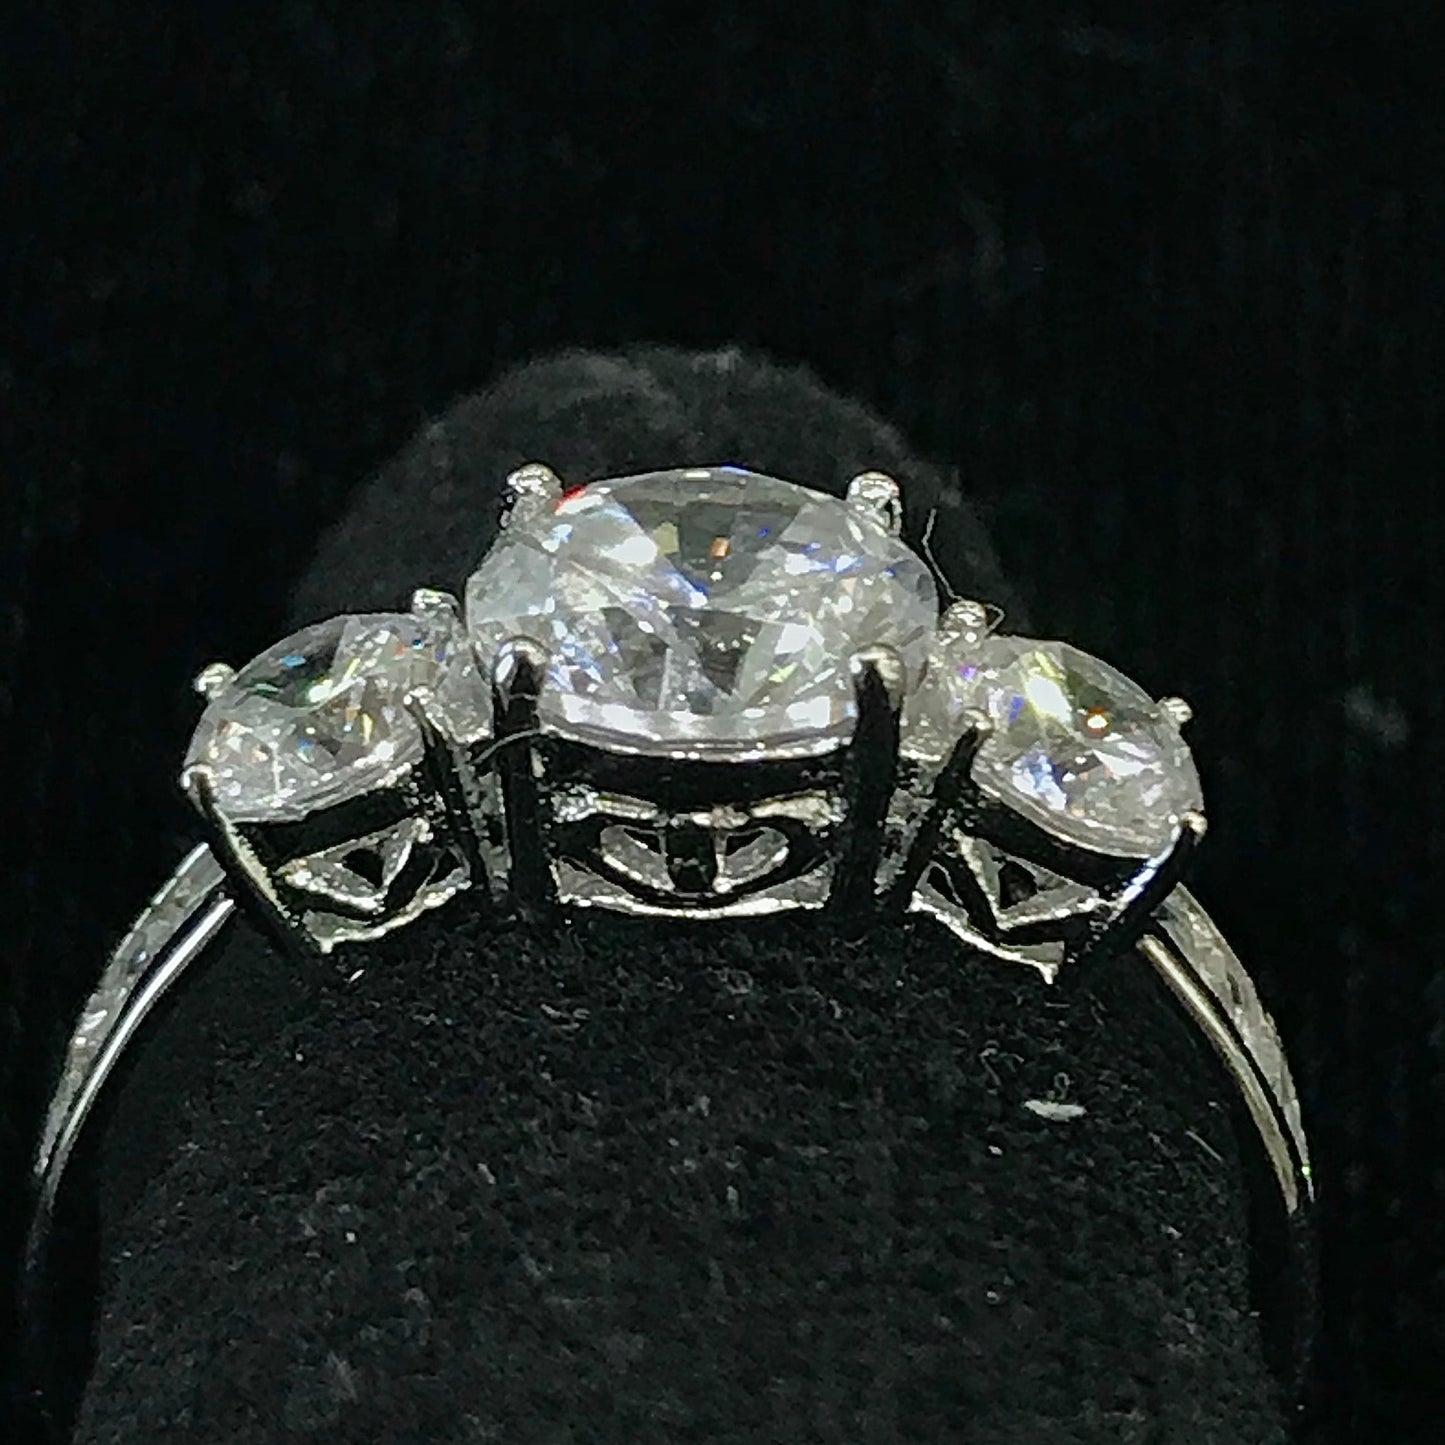 A sterling silver ring set with three round cut cubic zirconia stones.